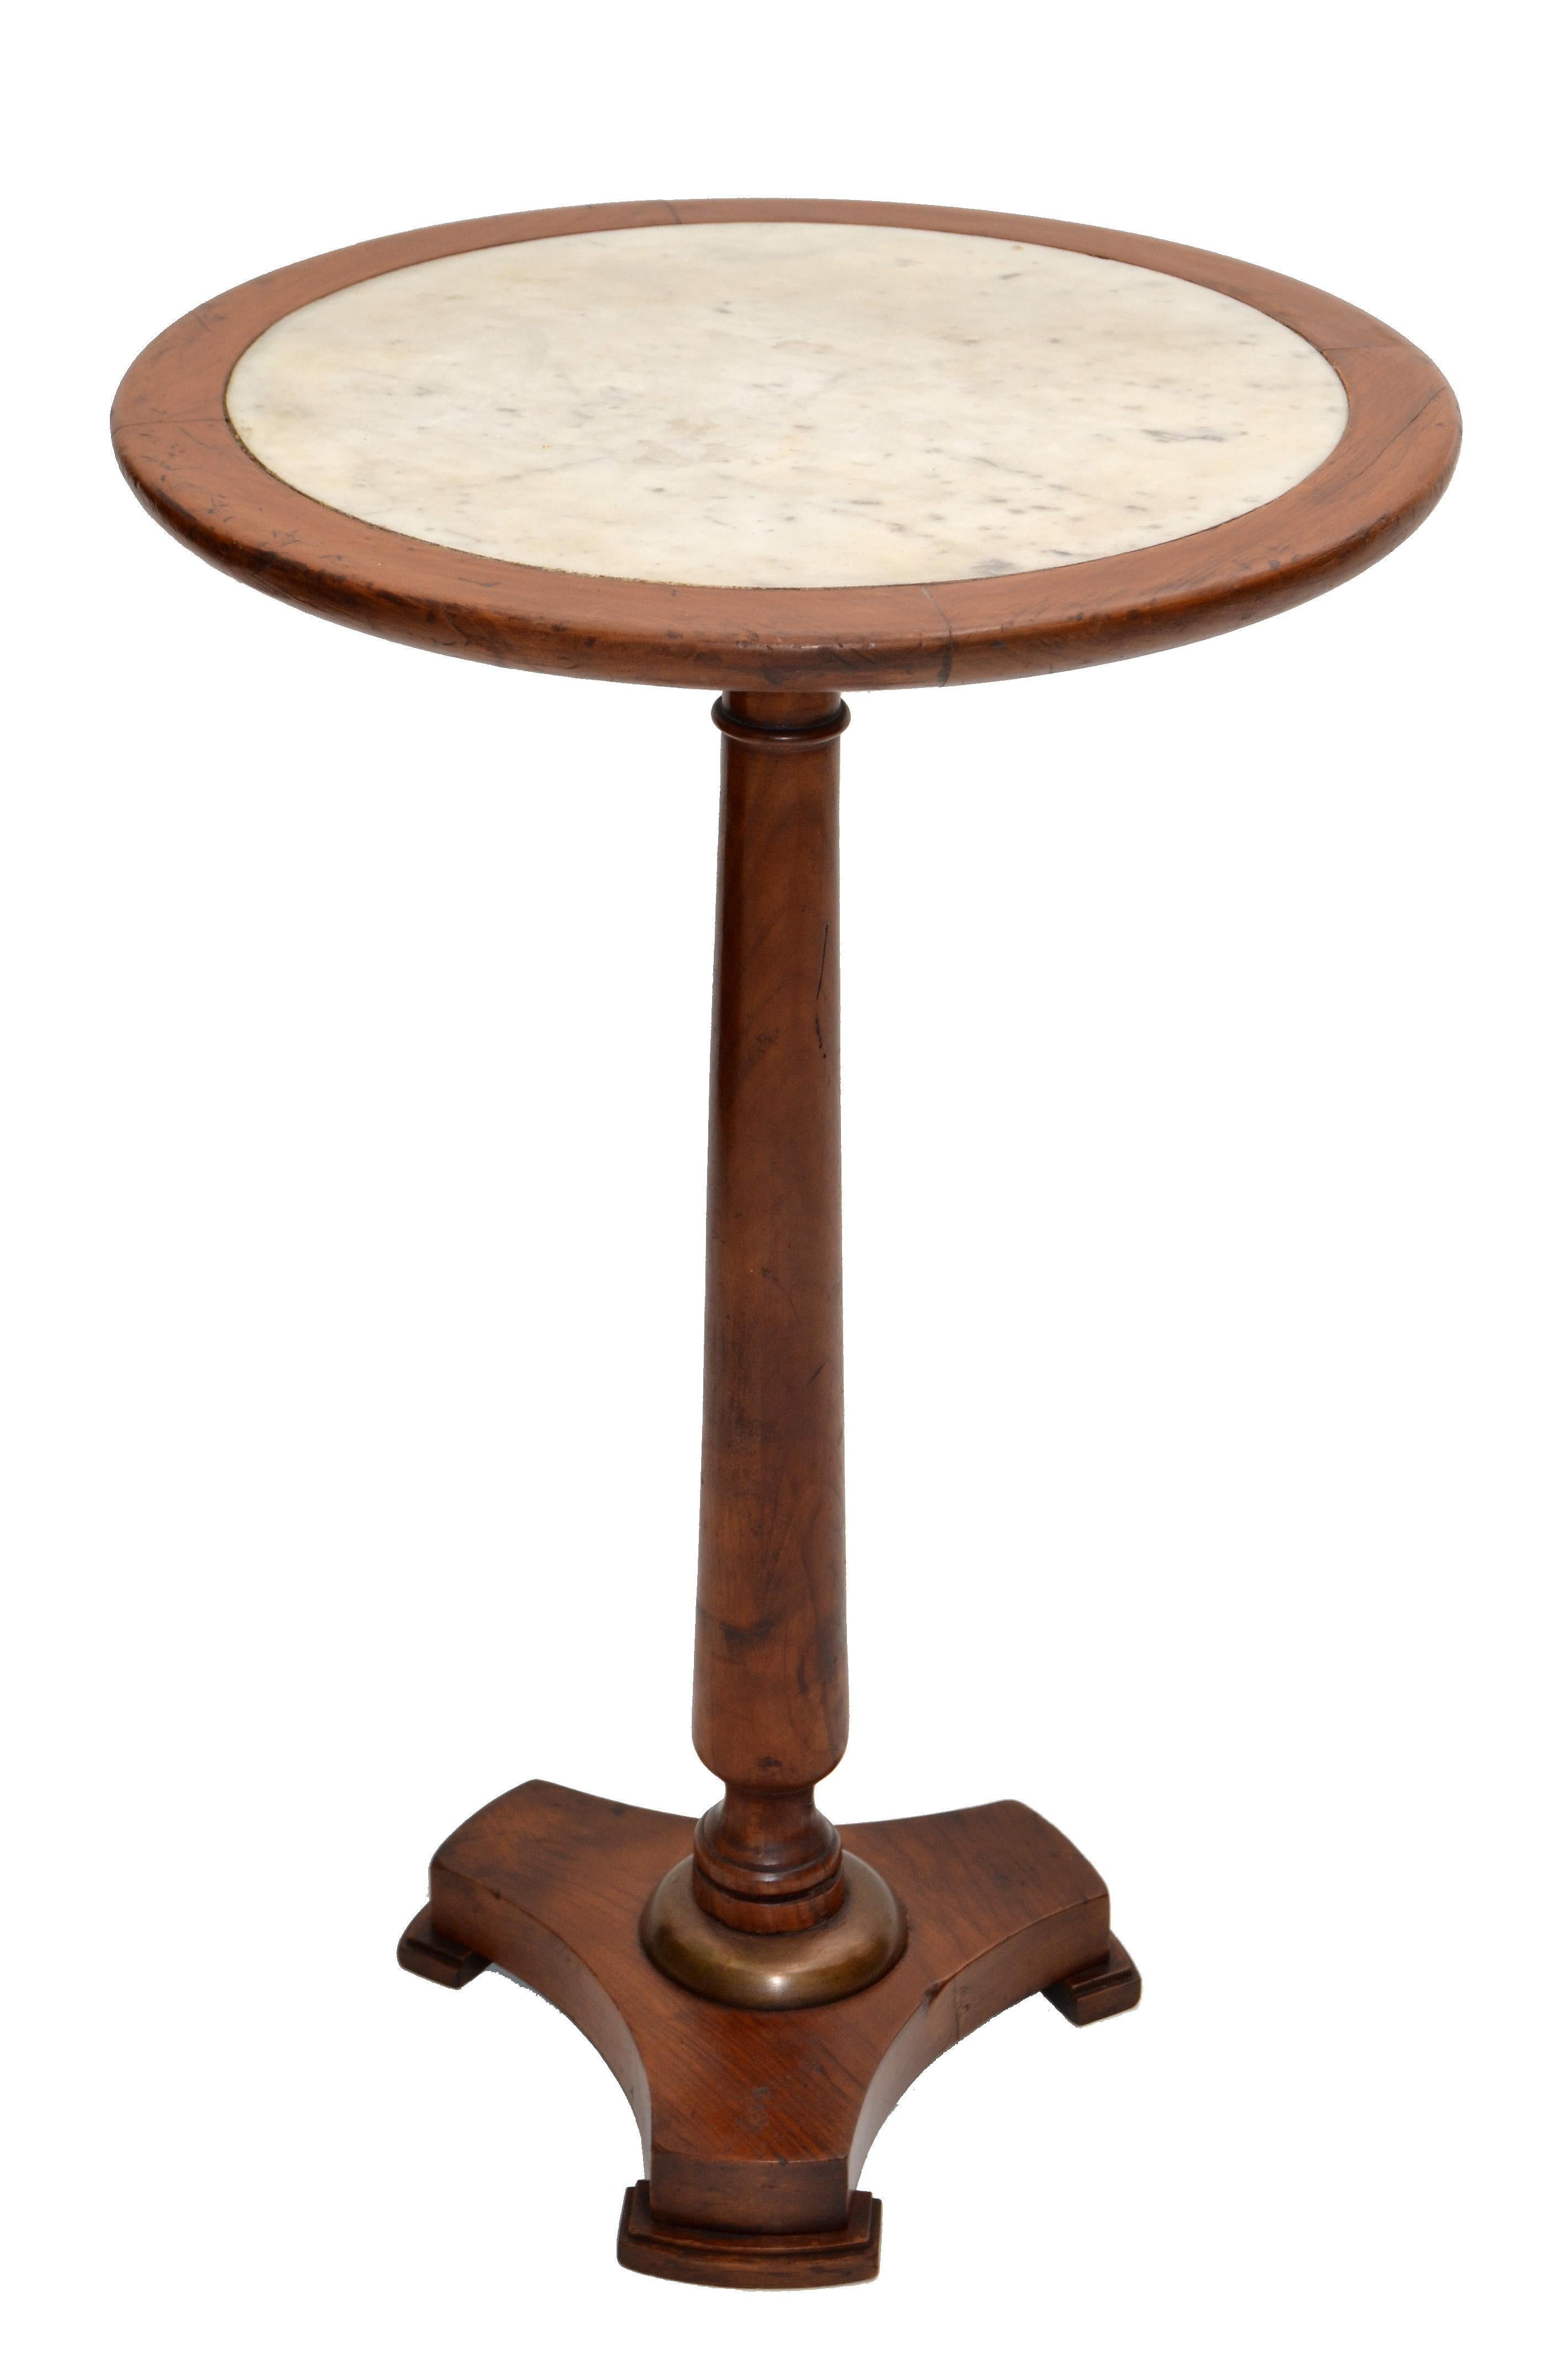 Empire Style Made In France Side Table Turned Oak Wood & Marble Top, 1950 In Good Condition For Sale In Miami, FL